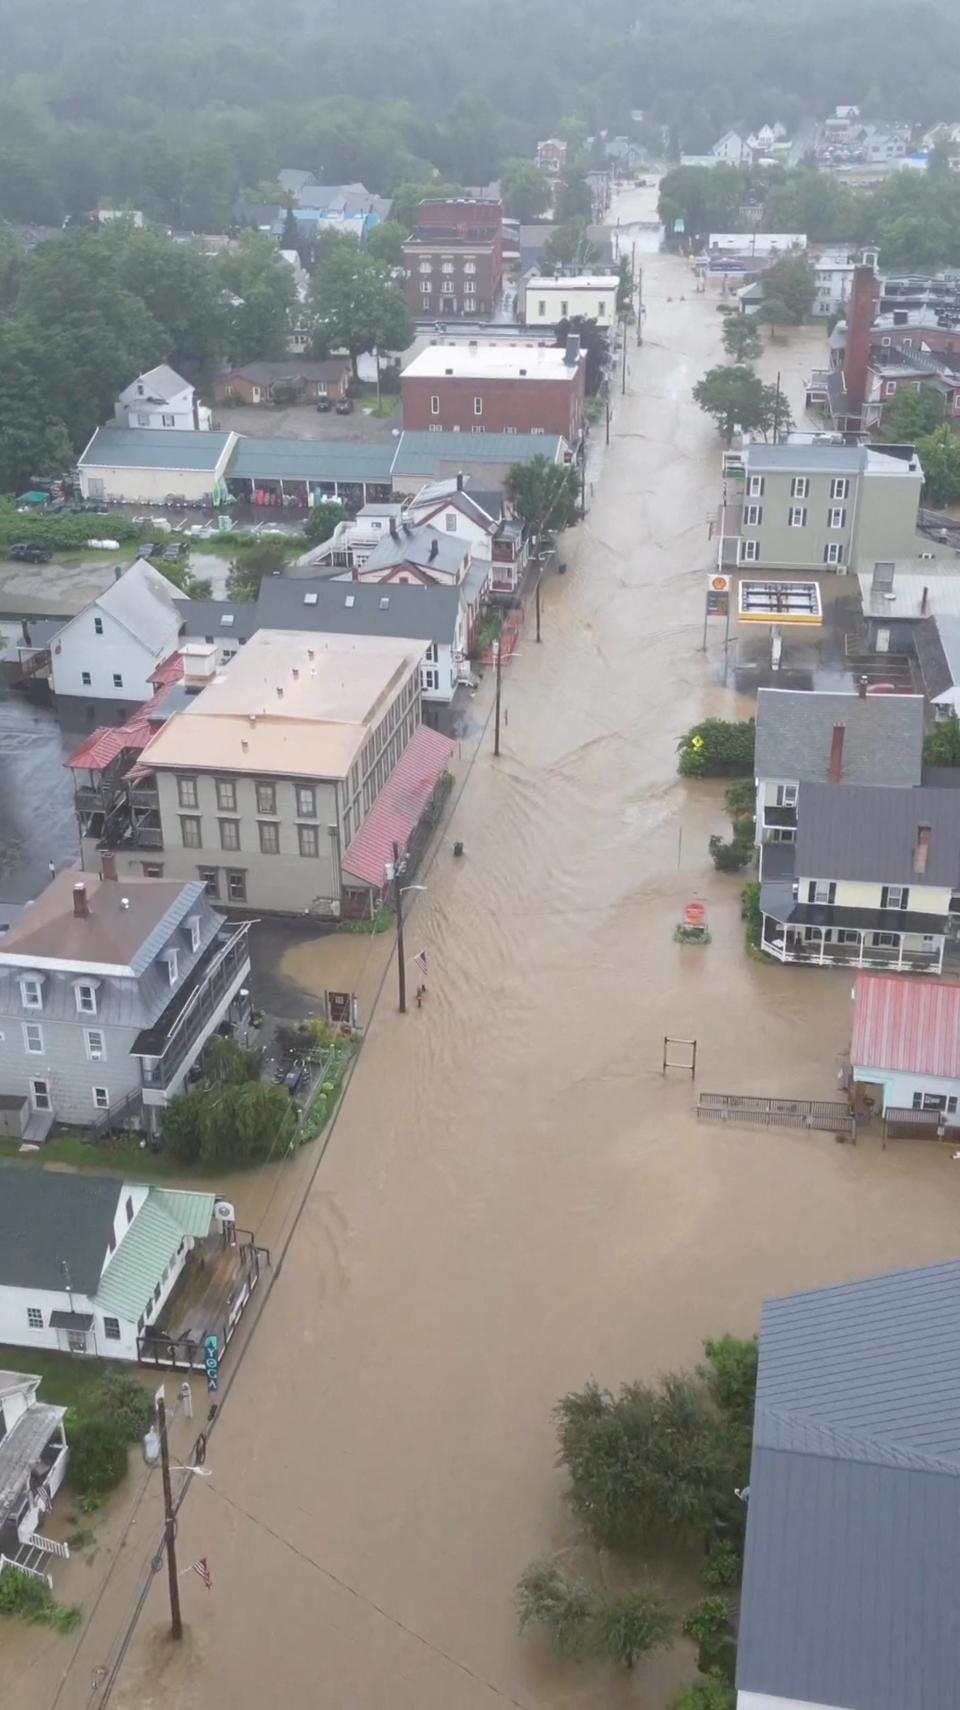 The downtown area of Ludlow, Vermont on Monday as floodwaters rushed through the streets (via REUTERS)